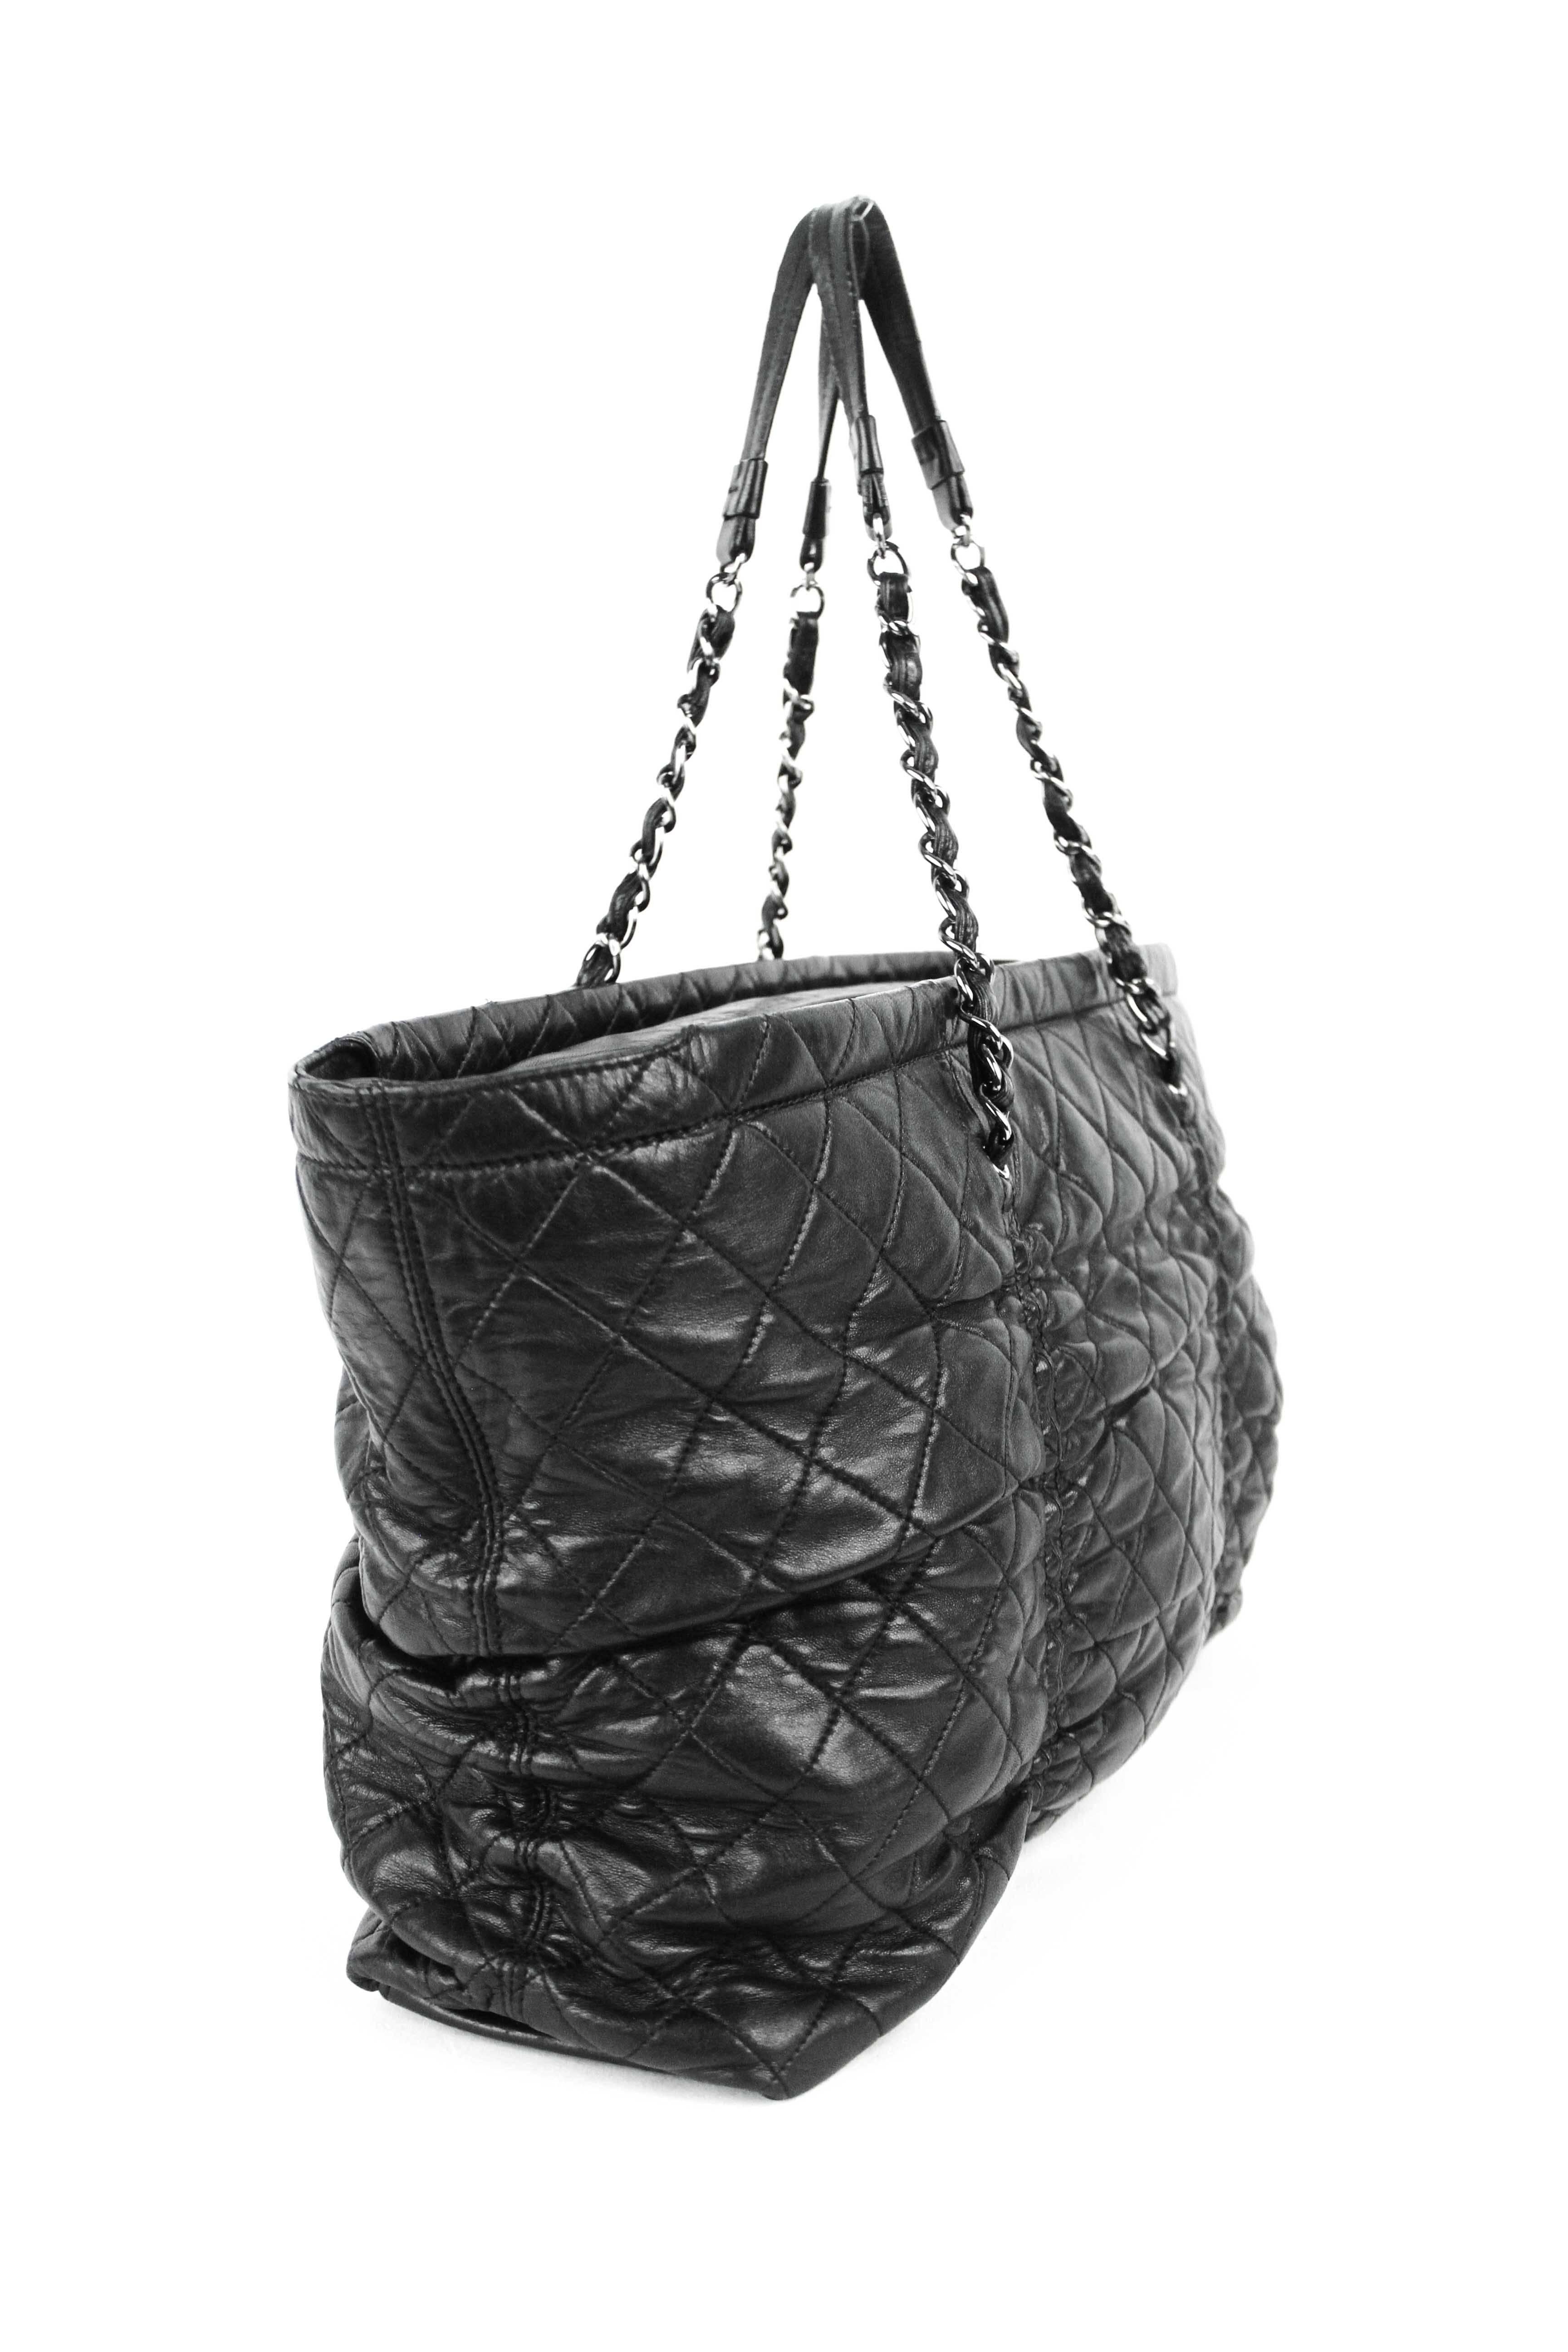 Offered is a pre-owned Chanel quilted lambskin tote with classic chain handles.  Ultra soft black lambskin complimented by silver-tone hardware.  Zip top closure, with a gray textile lining.  Good condition , wear can be seen on bottom leather